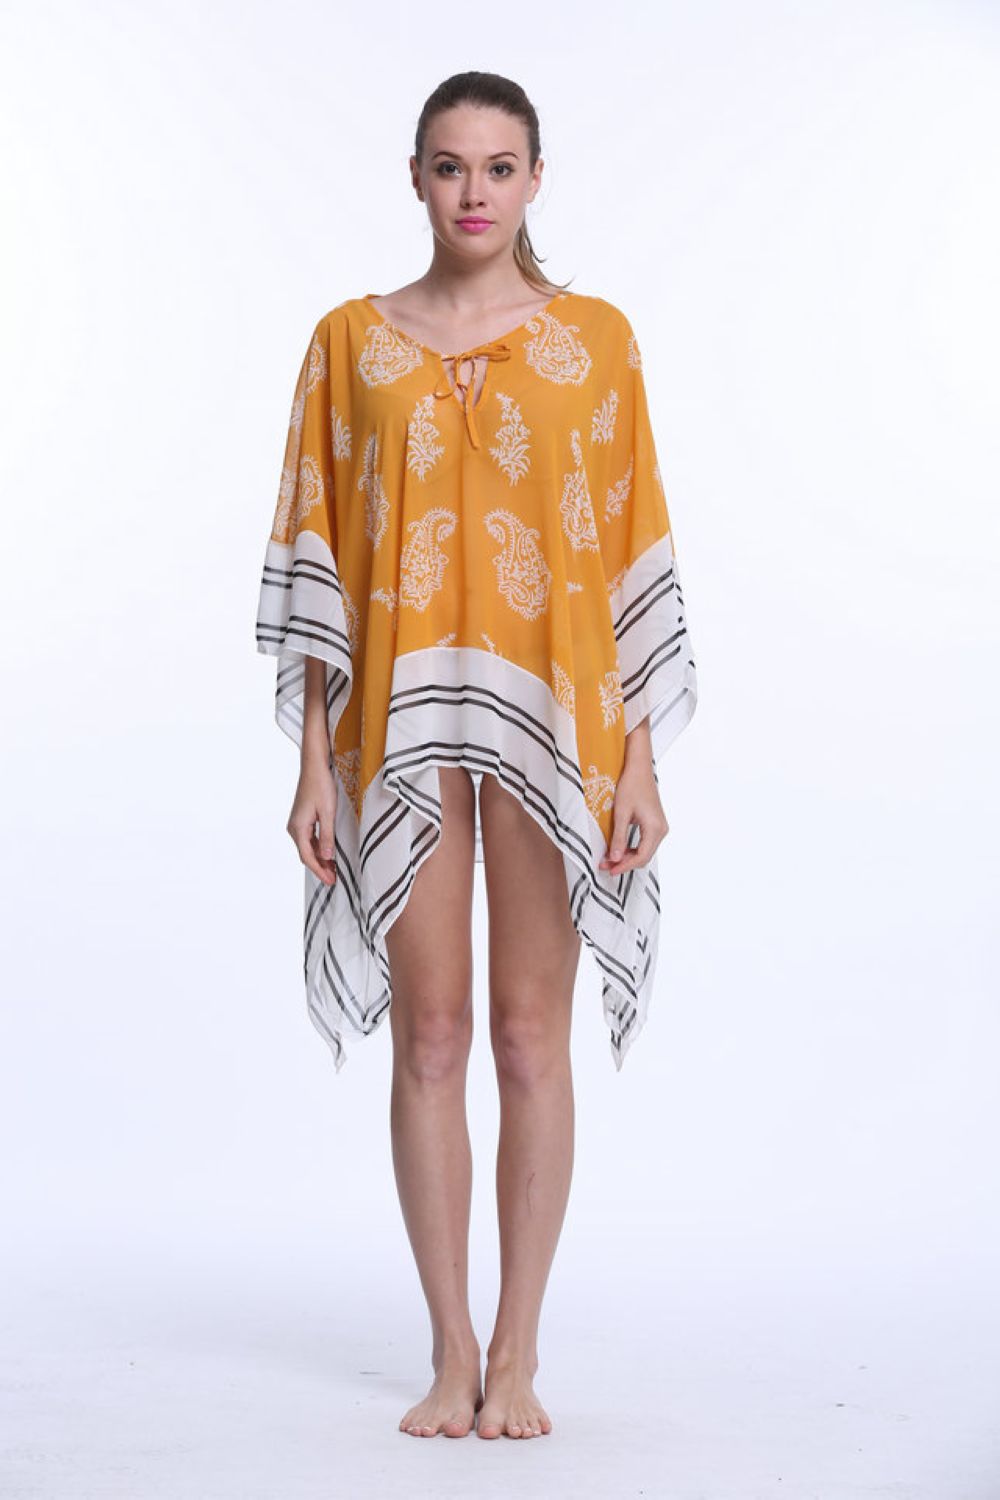 F4529swimsuit cover ups high quality transparent cover beach dress